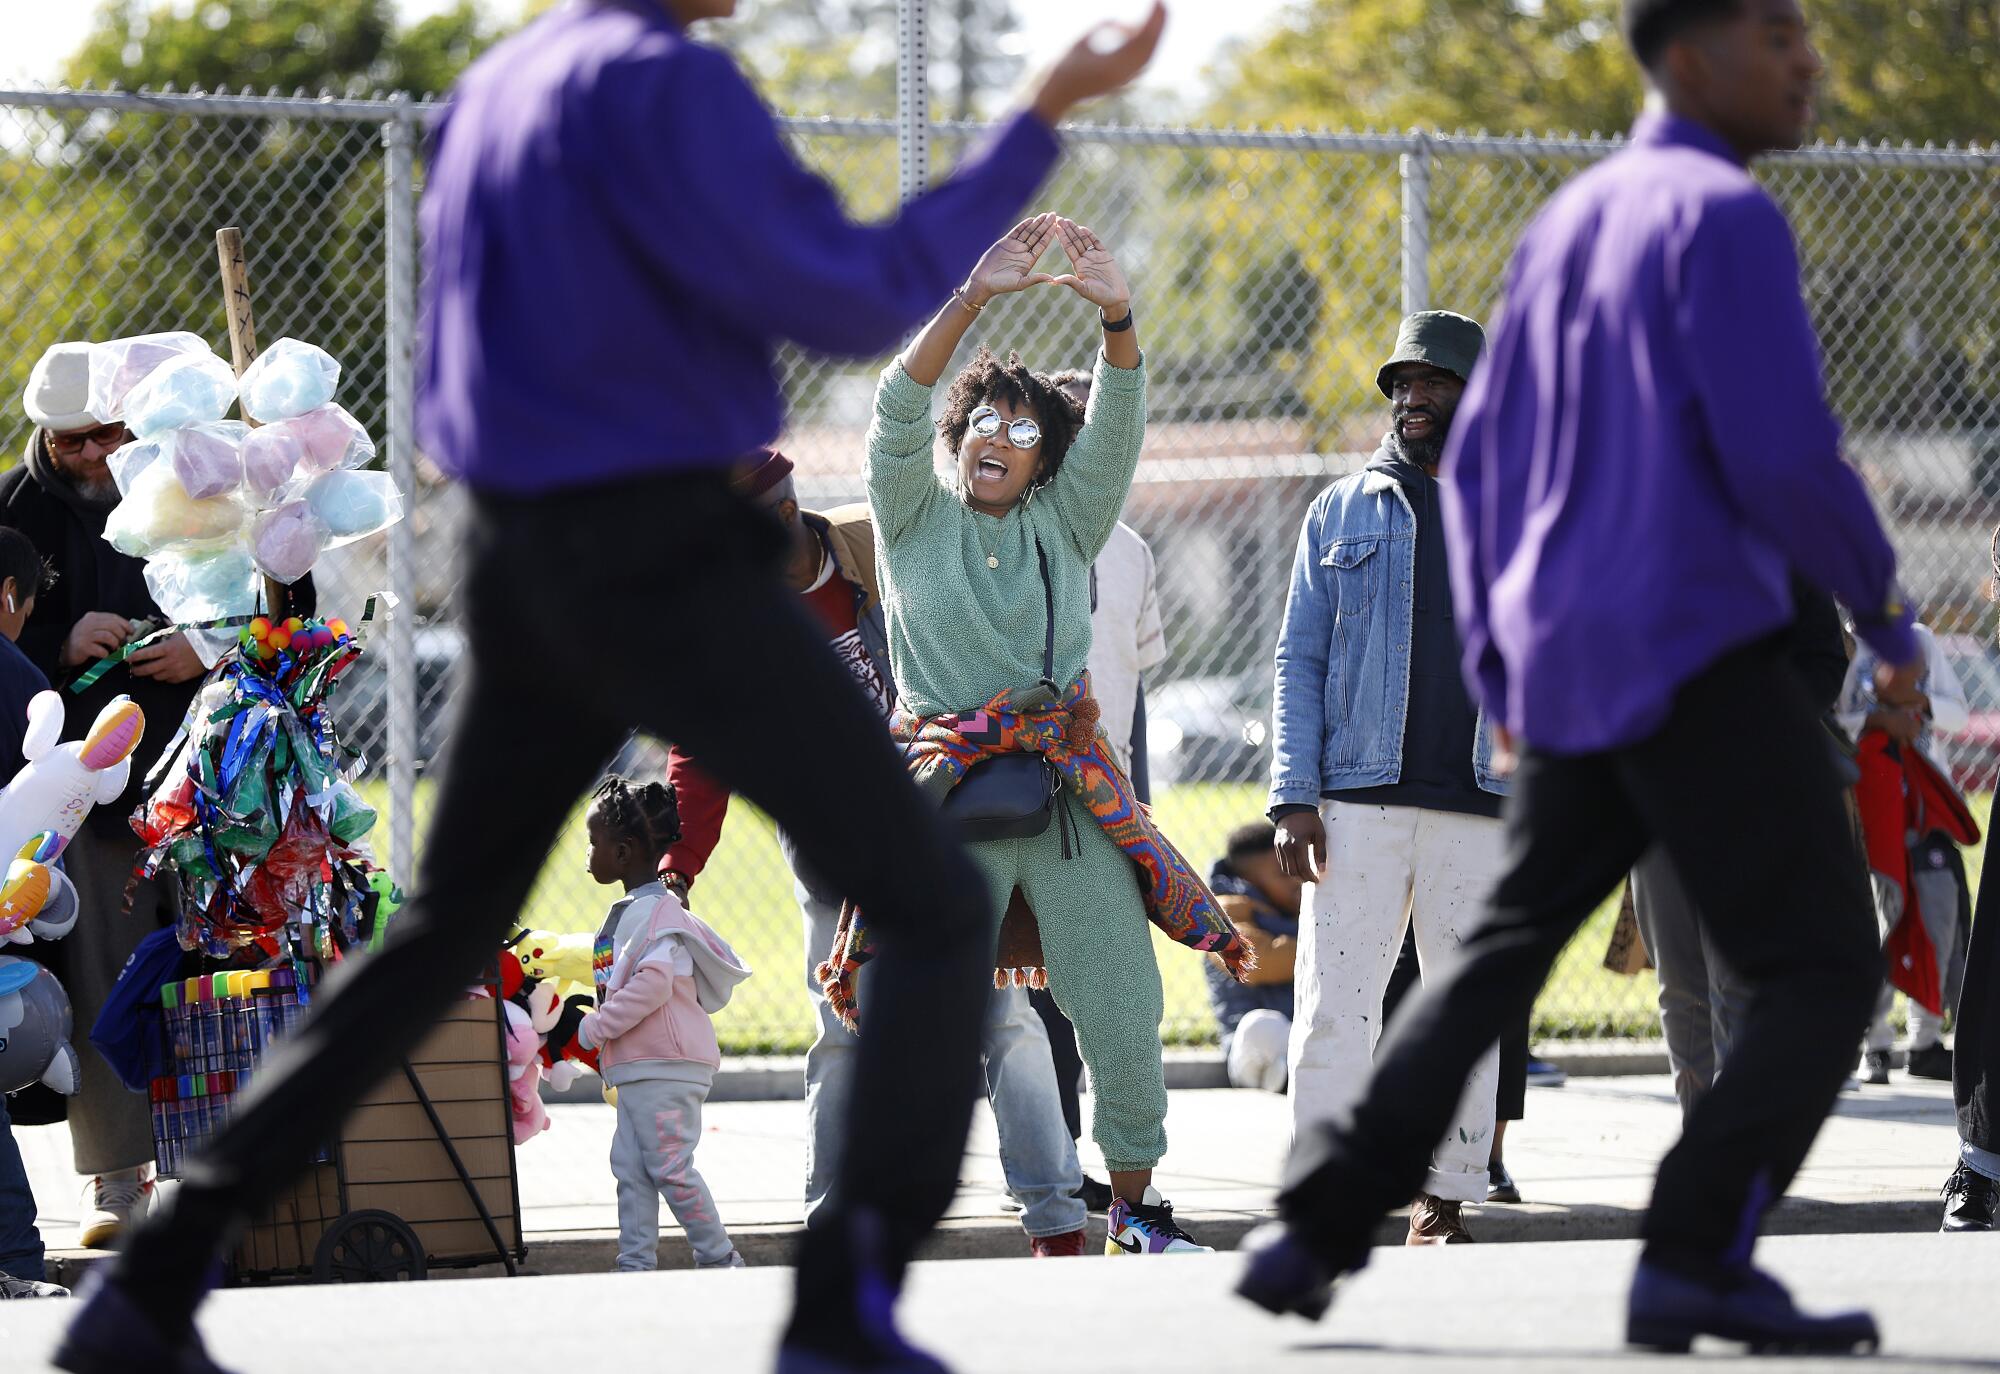 Jovian Zayne, center, dances along with participants in the 38th Annual Kingdom Day Parade in Leimert Park.